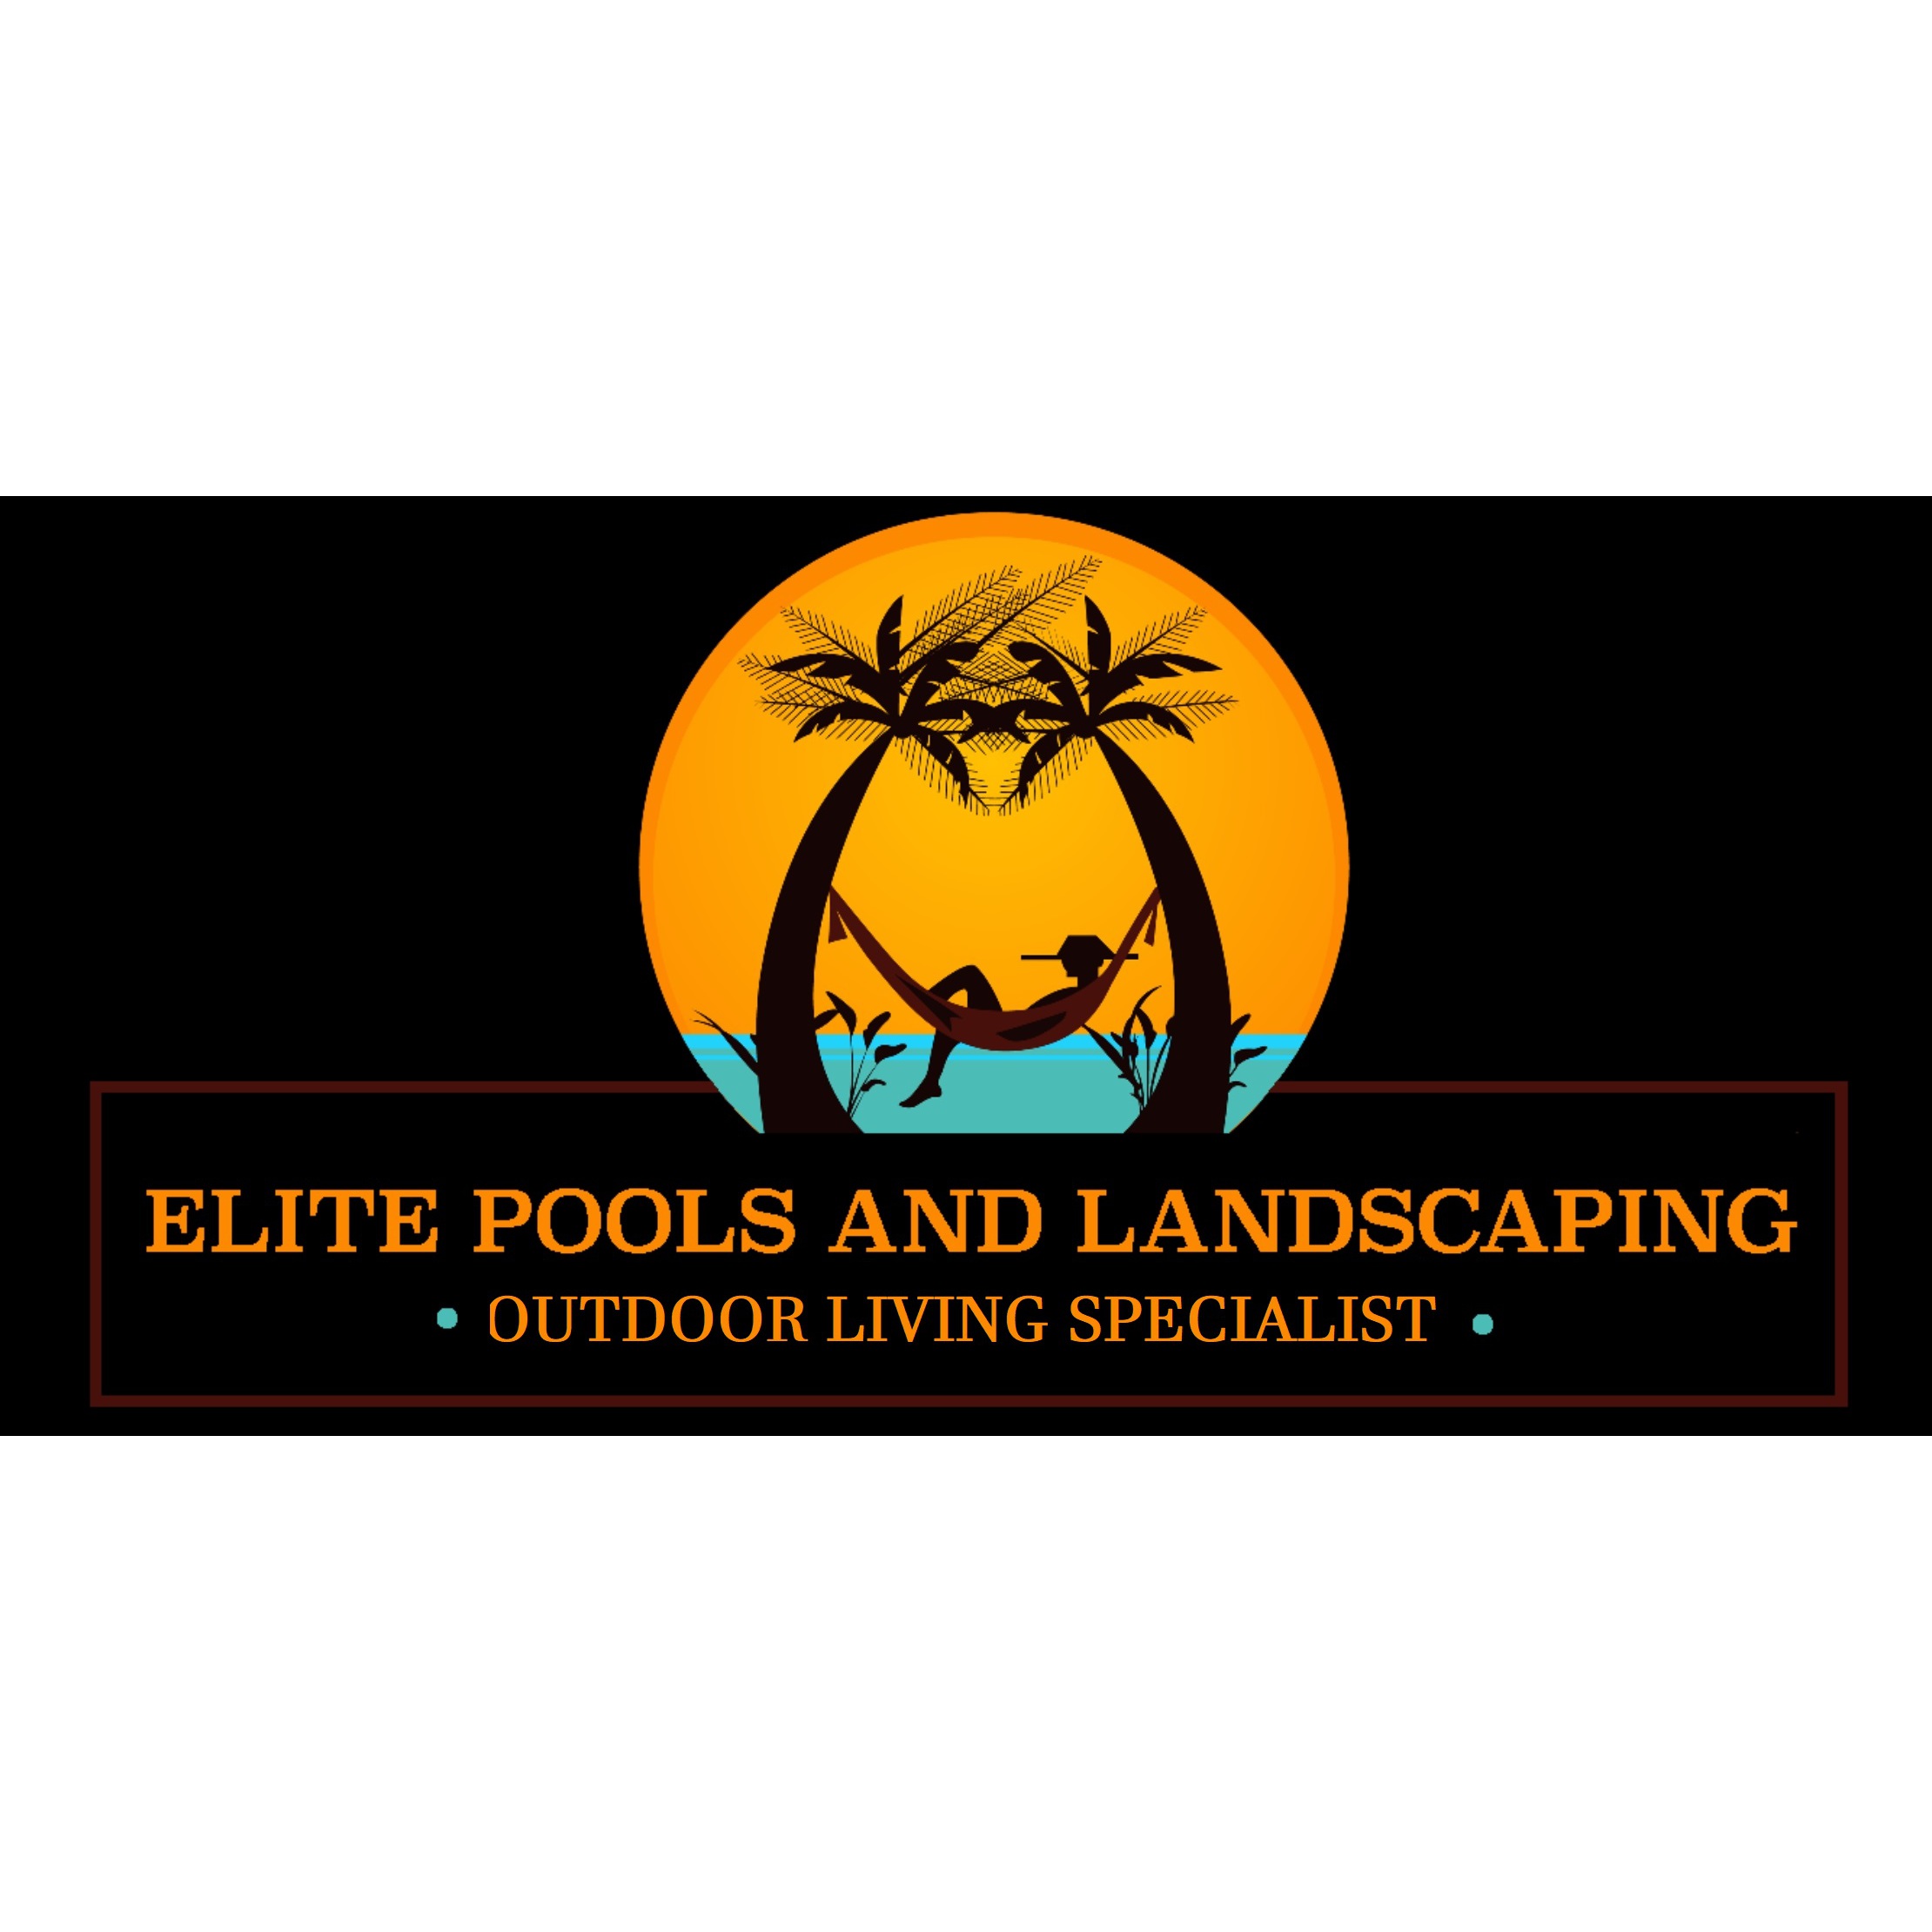 Elite pools and landscaping